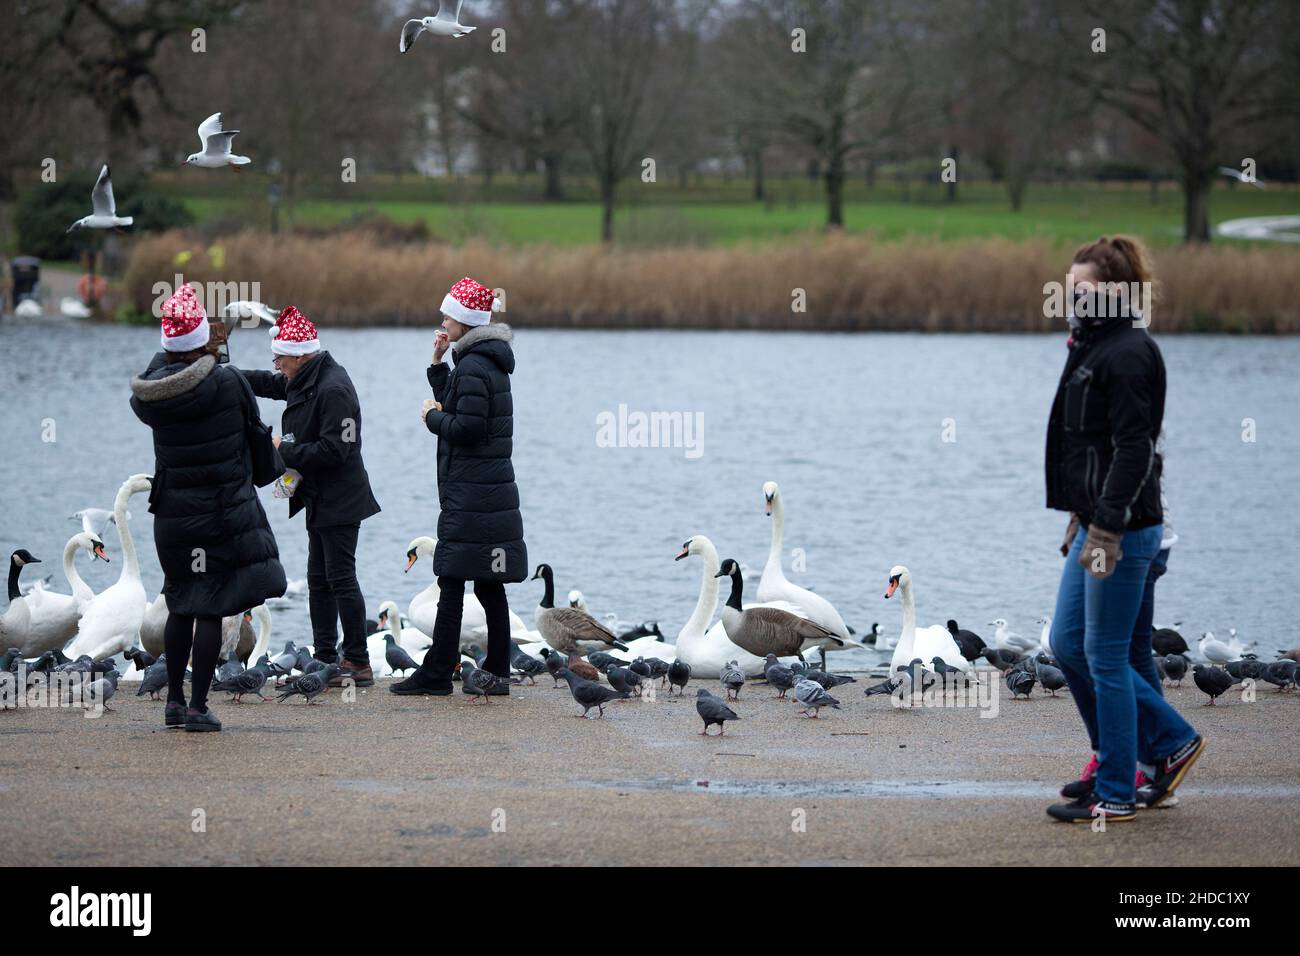 People wearing Santa Claus hats feed birds as pedestrians wearing face coverings walk past them in Hyde Park on Christmas Day in London. Stock Photo